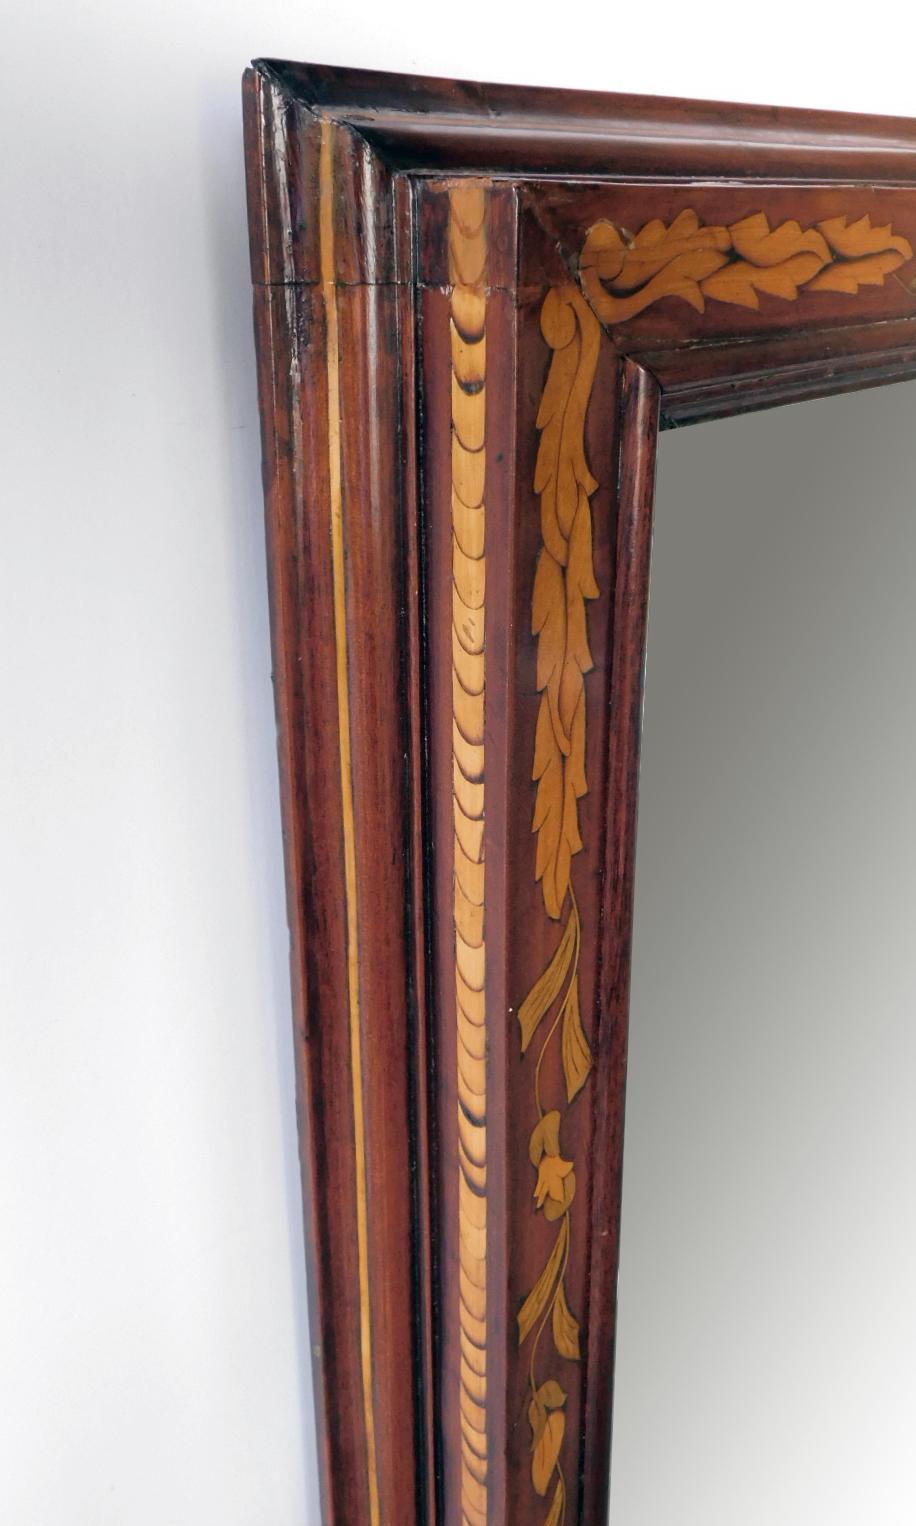 The mahogany ogee molded frame inlaid with a continuous boxwood floral and foliate marquetry vine.